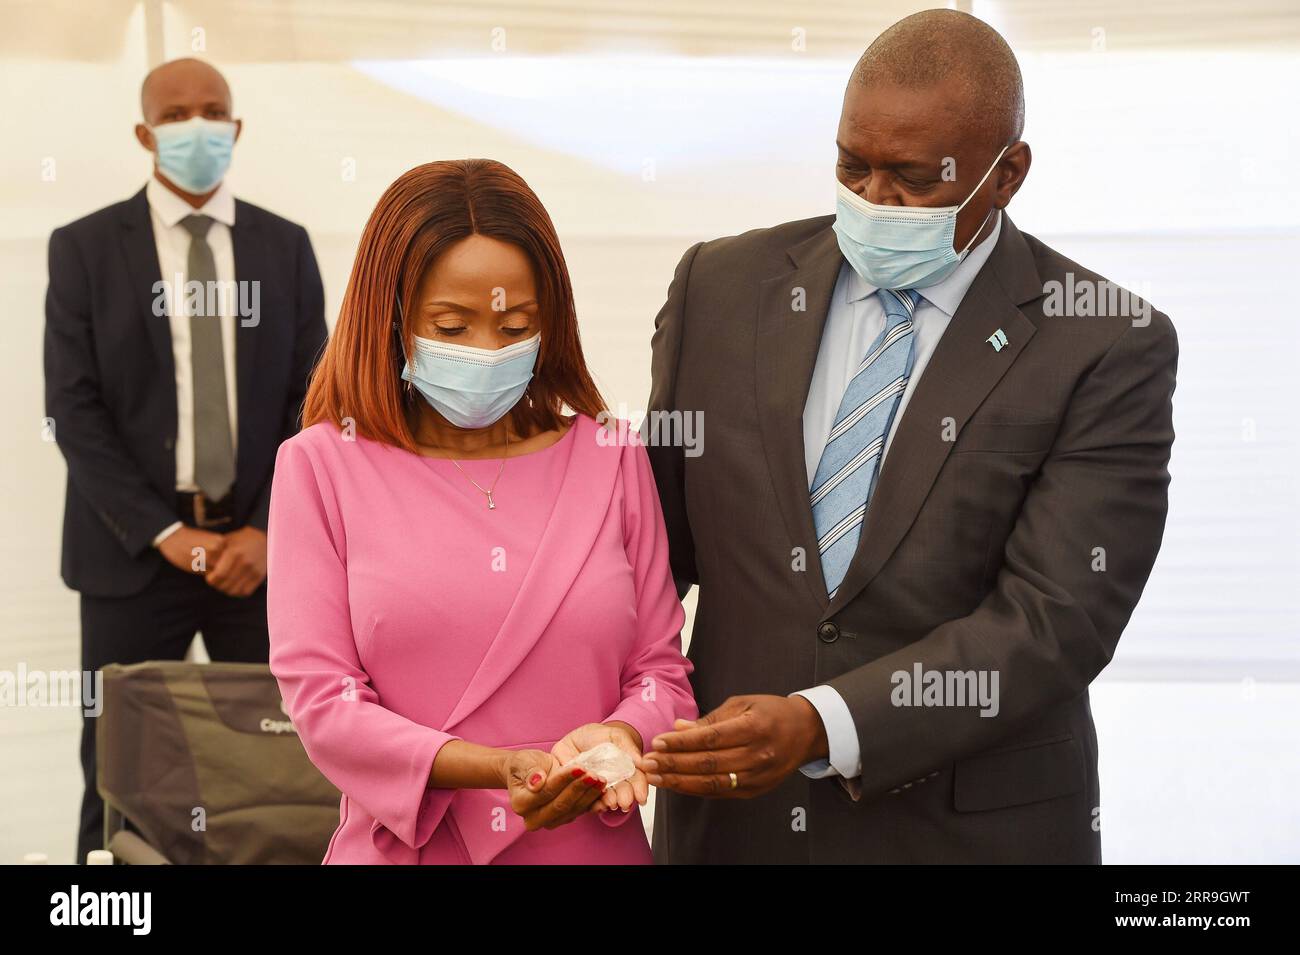 210616 -- GABORONE, June 16, 2021 -- Botswana President Mokgweetsi Masisi R and First Lady Neo Masisi hold the 1,098.30-carat diamond discovered by the Debswana Diamond Company in Gaborone, Botswana, on June 16, 2021. The Debswana Diamond Company on Wednesday presented a 1,098.30-carat diamond to Botswana President Mokgweetsi Masisi and the Cabinet in Gaborone, capital of Botswana. According to the company, the stone, discovered on June 1 from the south Kimberlite pipe at Jwaneng mine in the southern part of the country, is the largest of gem quality in the history of the company, a joint vent Stock Photo